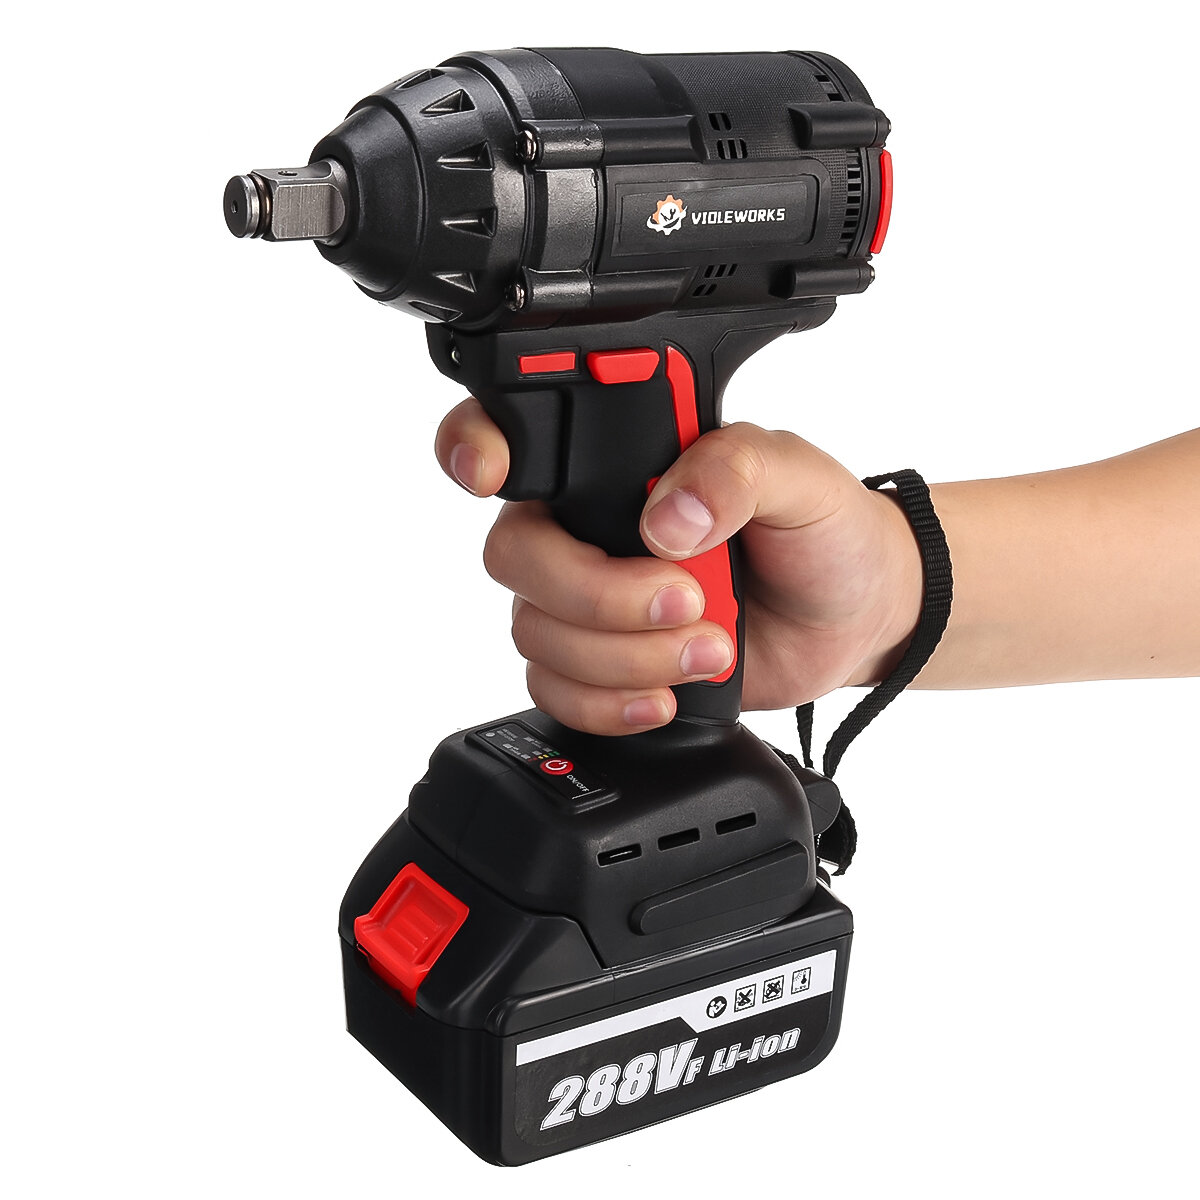 288VF 1/2" 520NM Max. Brushless Impact Wrench Motor Electric Wrench With/without Battery